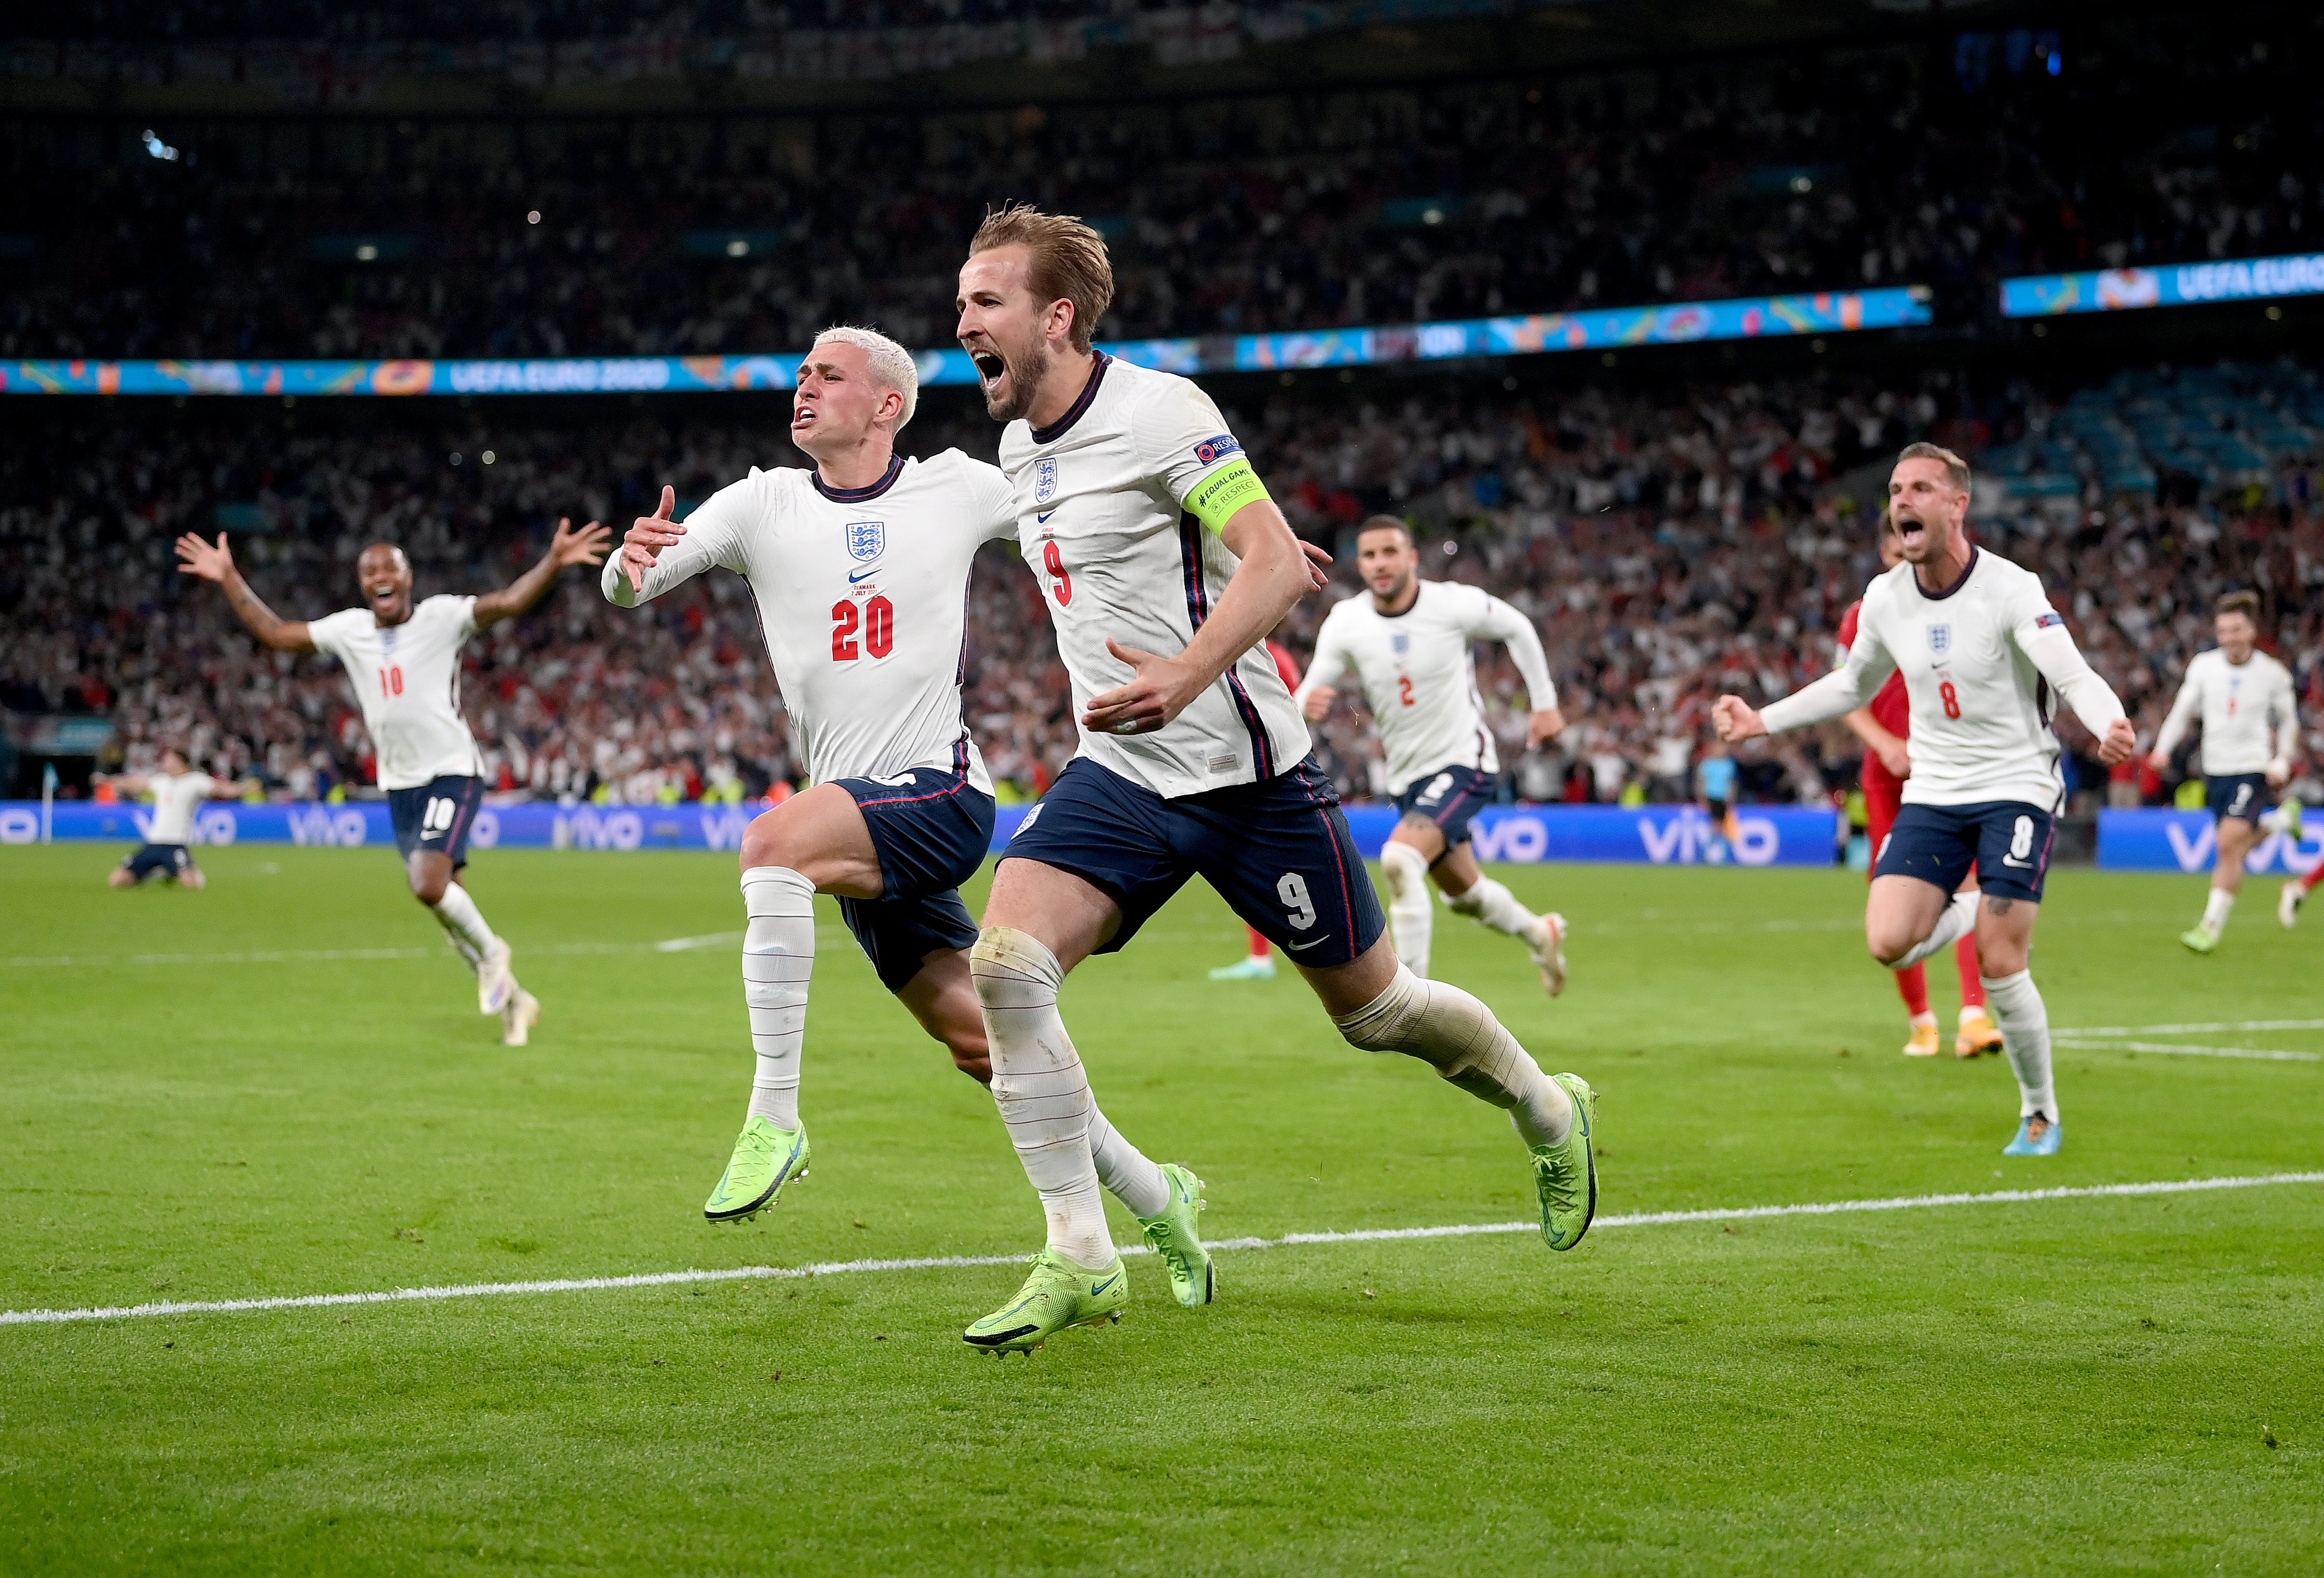 The top moment was when the England men’s football team reached the final of Euro 2020